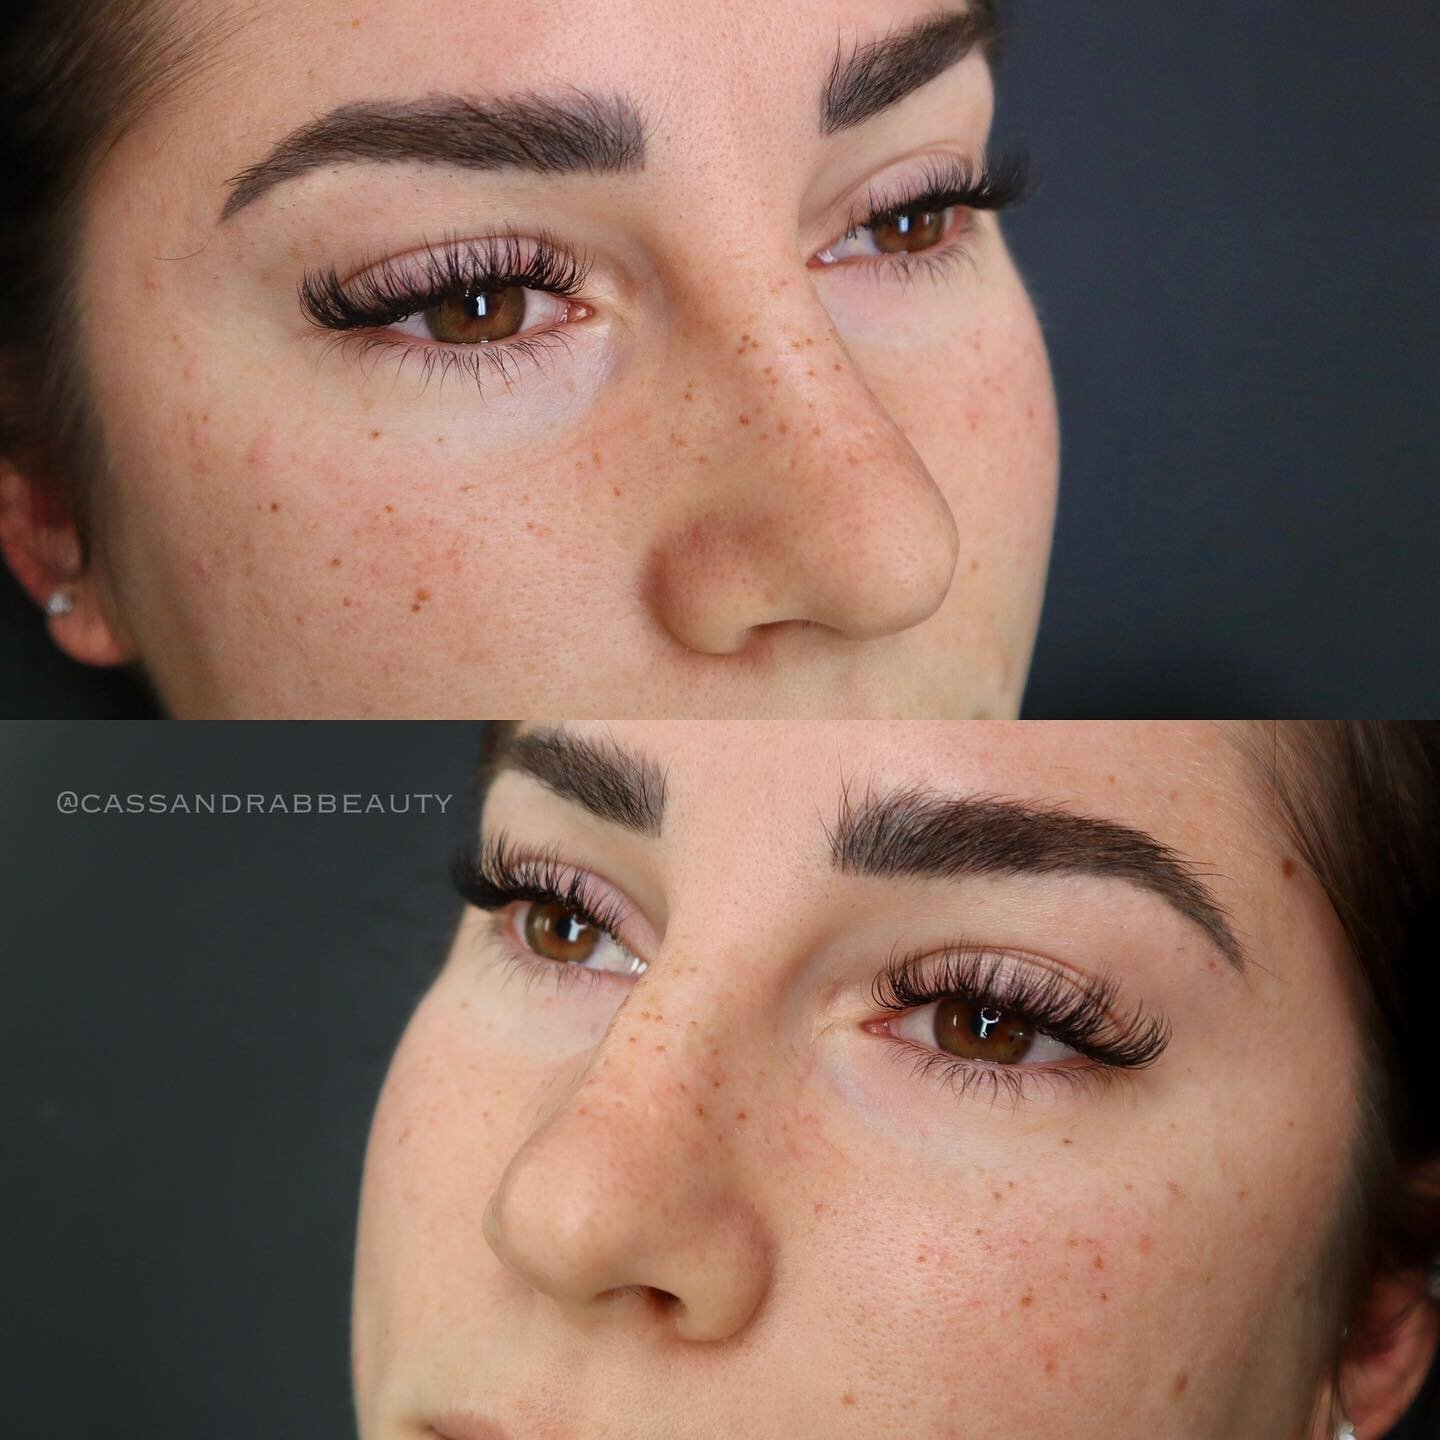 H E A L E D  FRECKLES 🤩
If you saw my reel of this client a few posts back you can now see how a freckle settles down quite a bit with healing to a natural little sun-kissed dusting ✨
-
Just 1 appointment left in March for new brow appointments and 